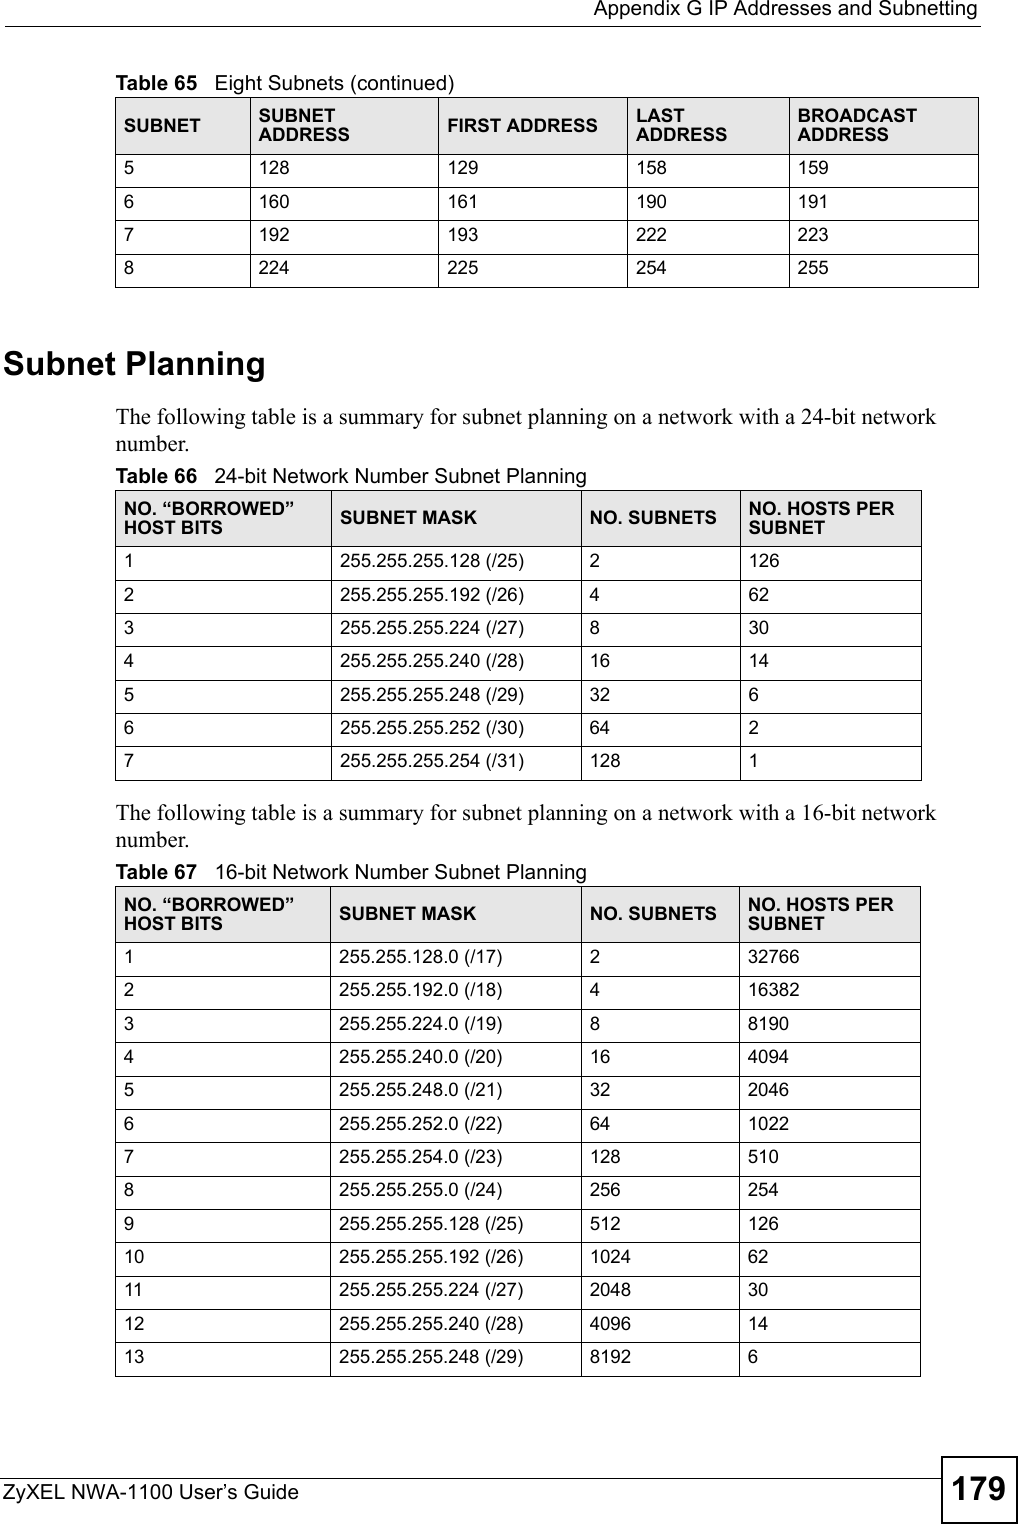  Appendix G IP Addresses and SubnettingZyXEL NWA-1100 User’s Guide 179Subnet PlanningThe following table is a summary for subnet planning on a network with a 24-bit network number.The following table is a summary for subnet planning on a network with a 16-bit network number. 5128 129 158 1596160 161 190 1917192 193 222 2238224 225 254 255Table 65   Eight Subnets (continued)SUBNET SUBNET ADDRESS FIRST ADDRESS LAST ADDRESSBROADCAST ADDRESSTable 66   24-bit Network Number Subnet PlanningNO. “BORROWED” HOST BITS SUBNET MASK NO. SUBNETS NO. HOSTS PER SUBNET1255.255.255.128 (/25) 21262255.255.255.192 (/26) 4623255.255.255.224 (/27) 8304255.255.255.240 (/28) 16 145255.255.255.248 (/29) 32 66255.255.255.252 (/30) 64 27255.255.255.254 (/31) 128 1Table 67   16-bit Network Number Subnet PlanningNO. “BORROWED” HOST BITS SUBNET MASK NO. SUBNETS NO. HOSTS PER SUBNET1255.255.128.0 (/17) 2327662255.255.192.0 (/18) 4163823255.255.224.0 (/19) 881904255.255.240.0 (/20) 16 40945255.255.248.0 (/21) 32 20466255.255.252.0 (/22) 64 10227255.255.254.0 (/23) 128 5108255.255.255.0 (/24) 256 2549255.255.255.128 (/25) 512 12610 255.255.255.192 (/26) 1024 6211 255.255.255.224 (/27) 2048 3012 255.255.255.240 (/28) 4096 1413 255.255.255.248 (/29) 8192 6